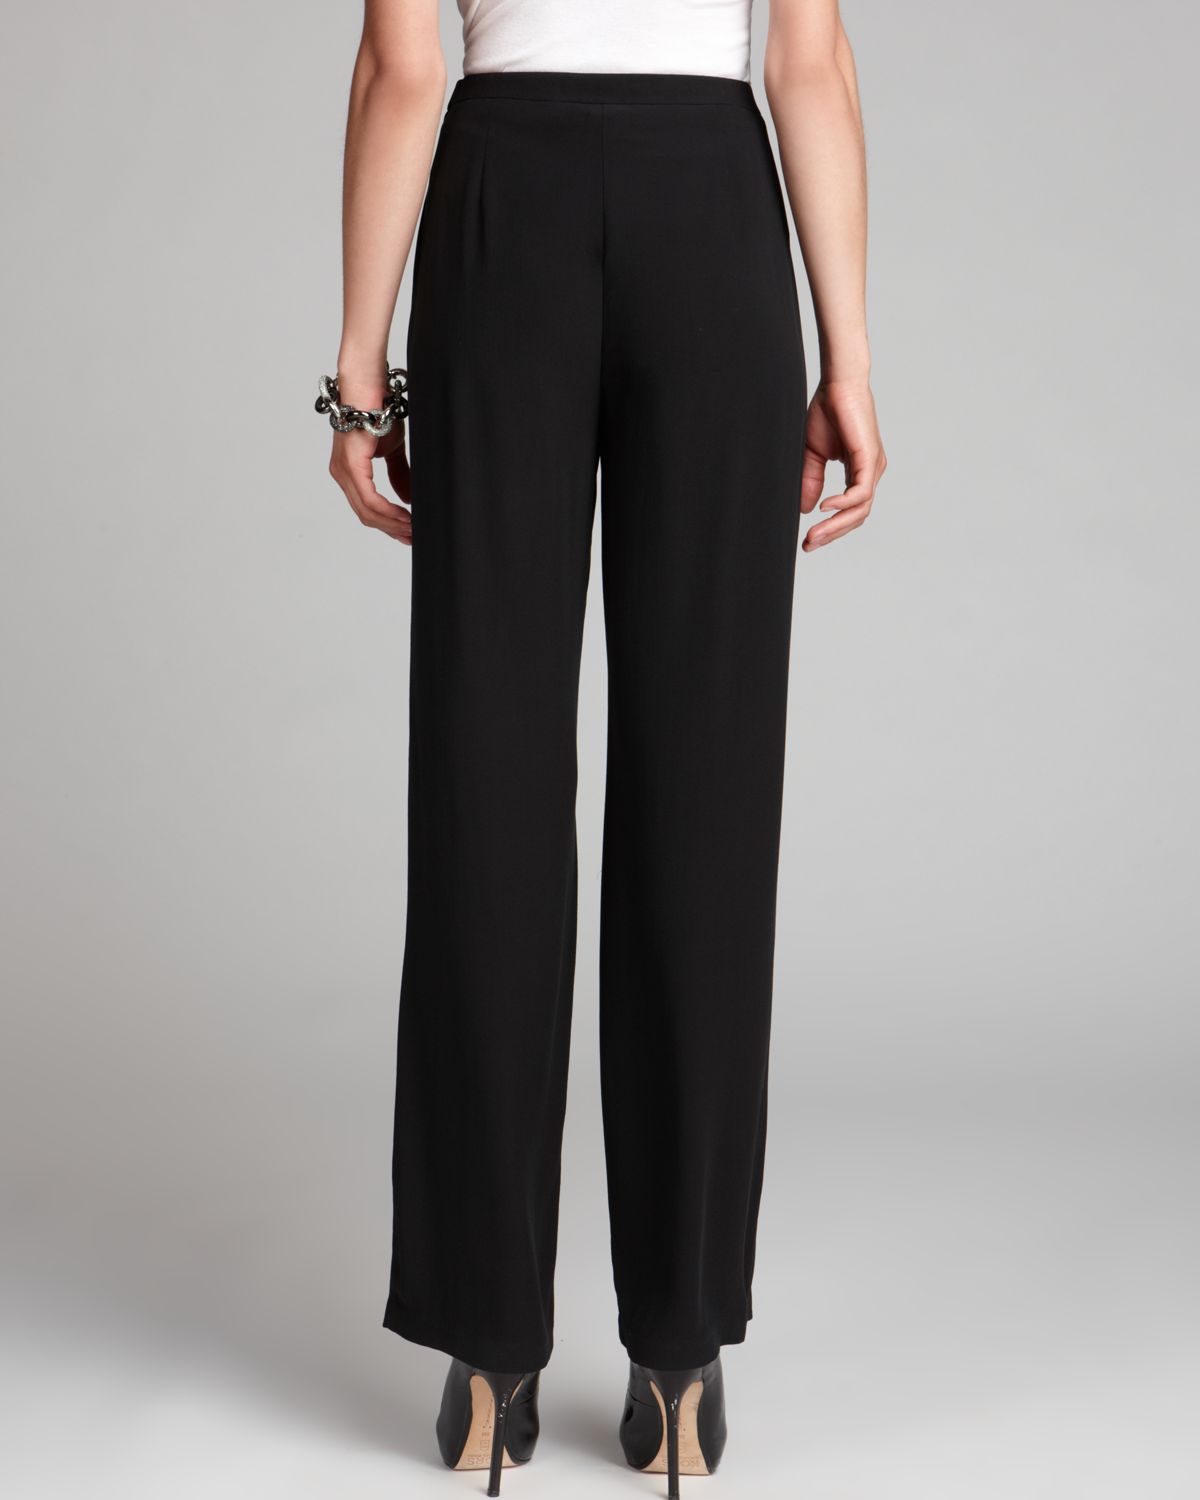 Eileen Fisher Straight Silk Pants with Side Zip in Black - Lyst